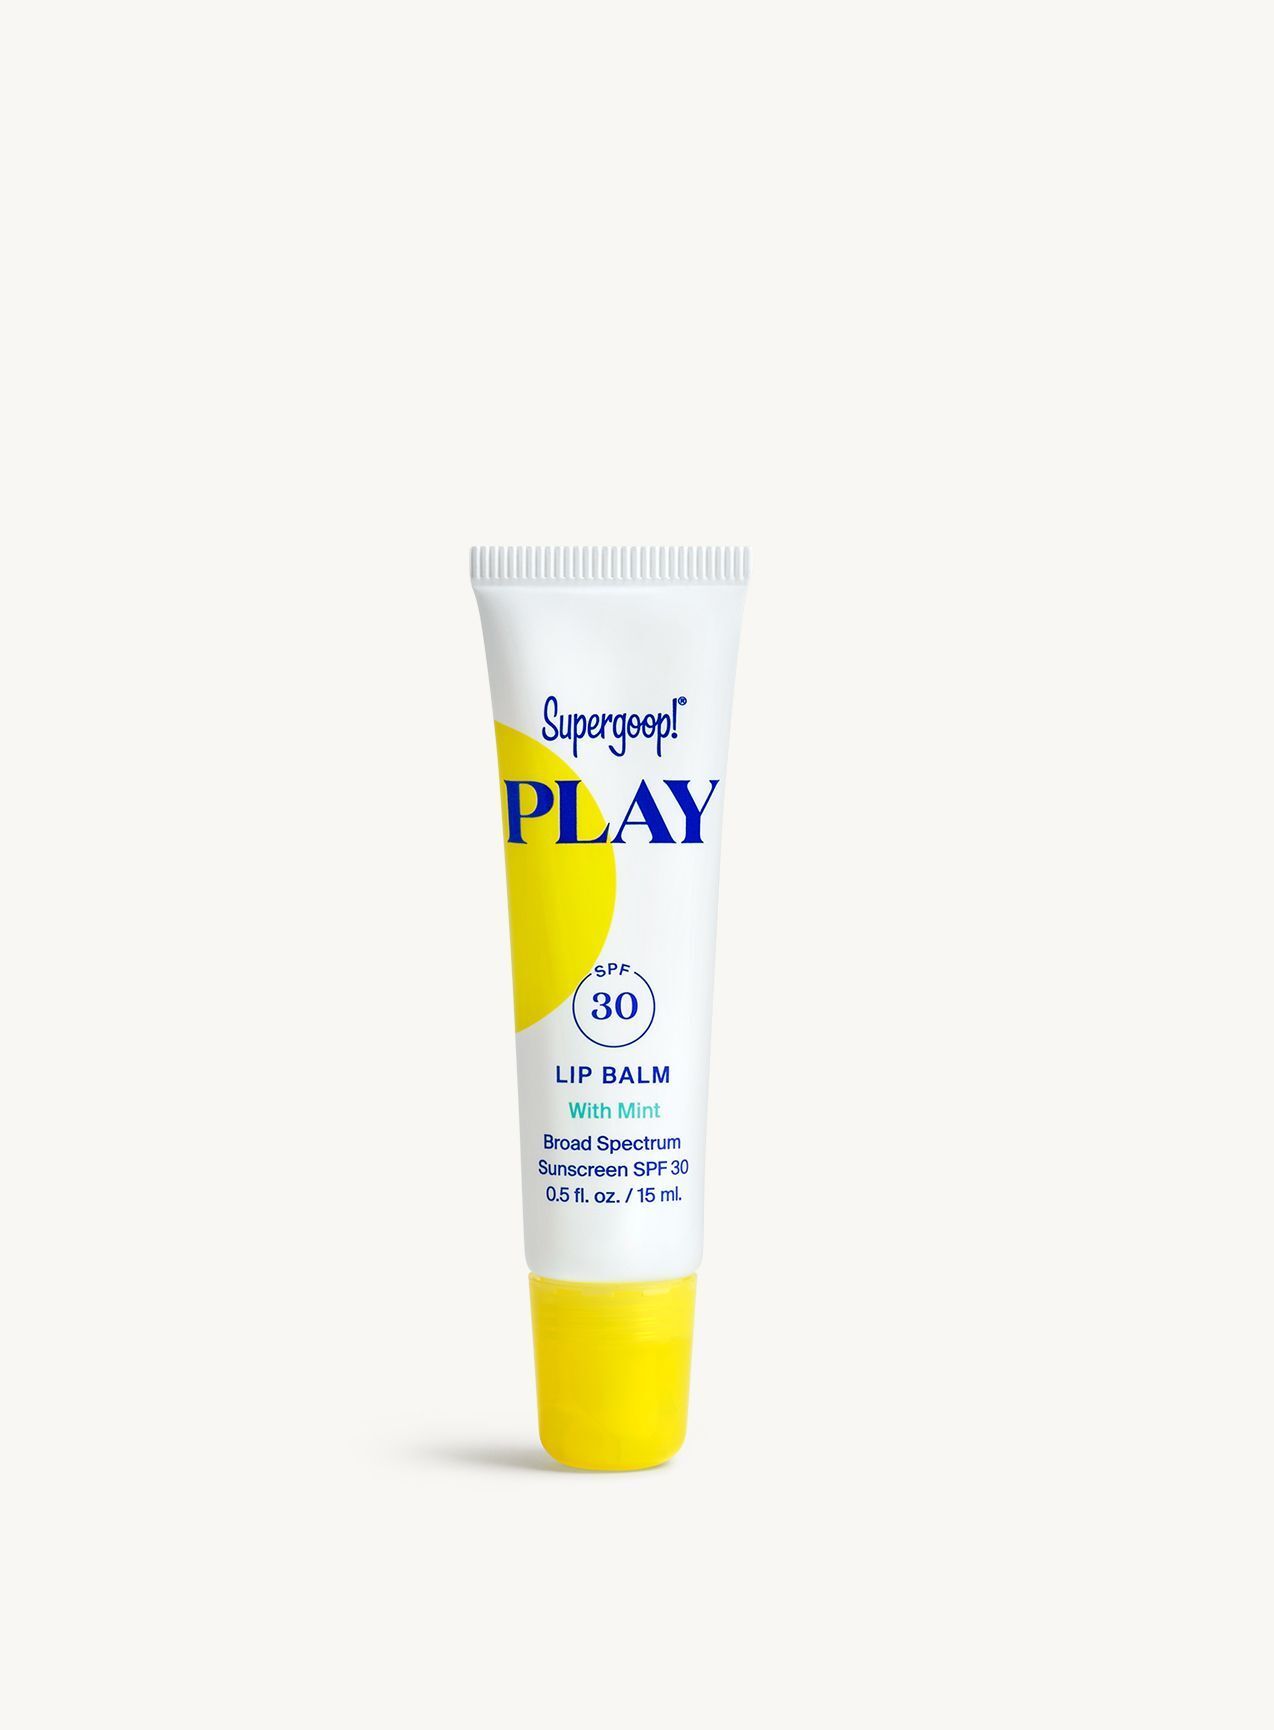 Supergoop! - PLAY Lip Balm SPF 30 with Mint